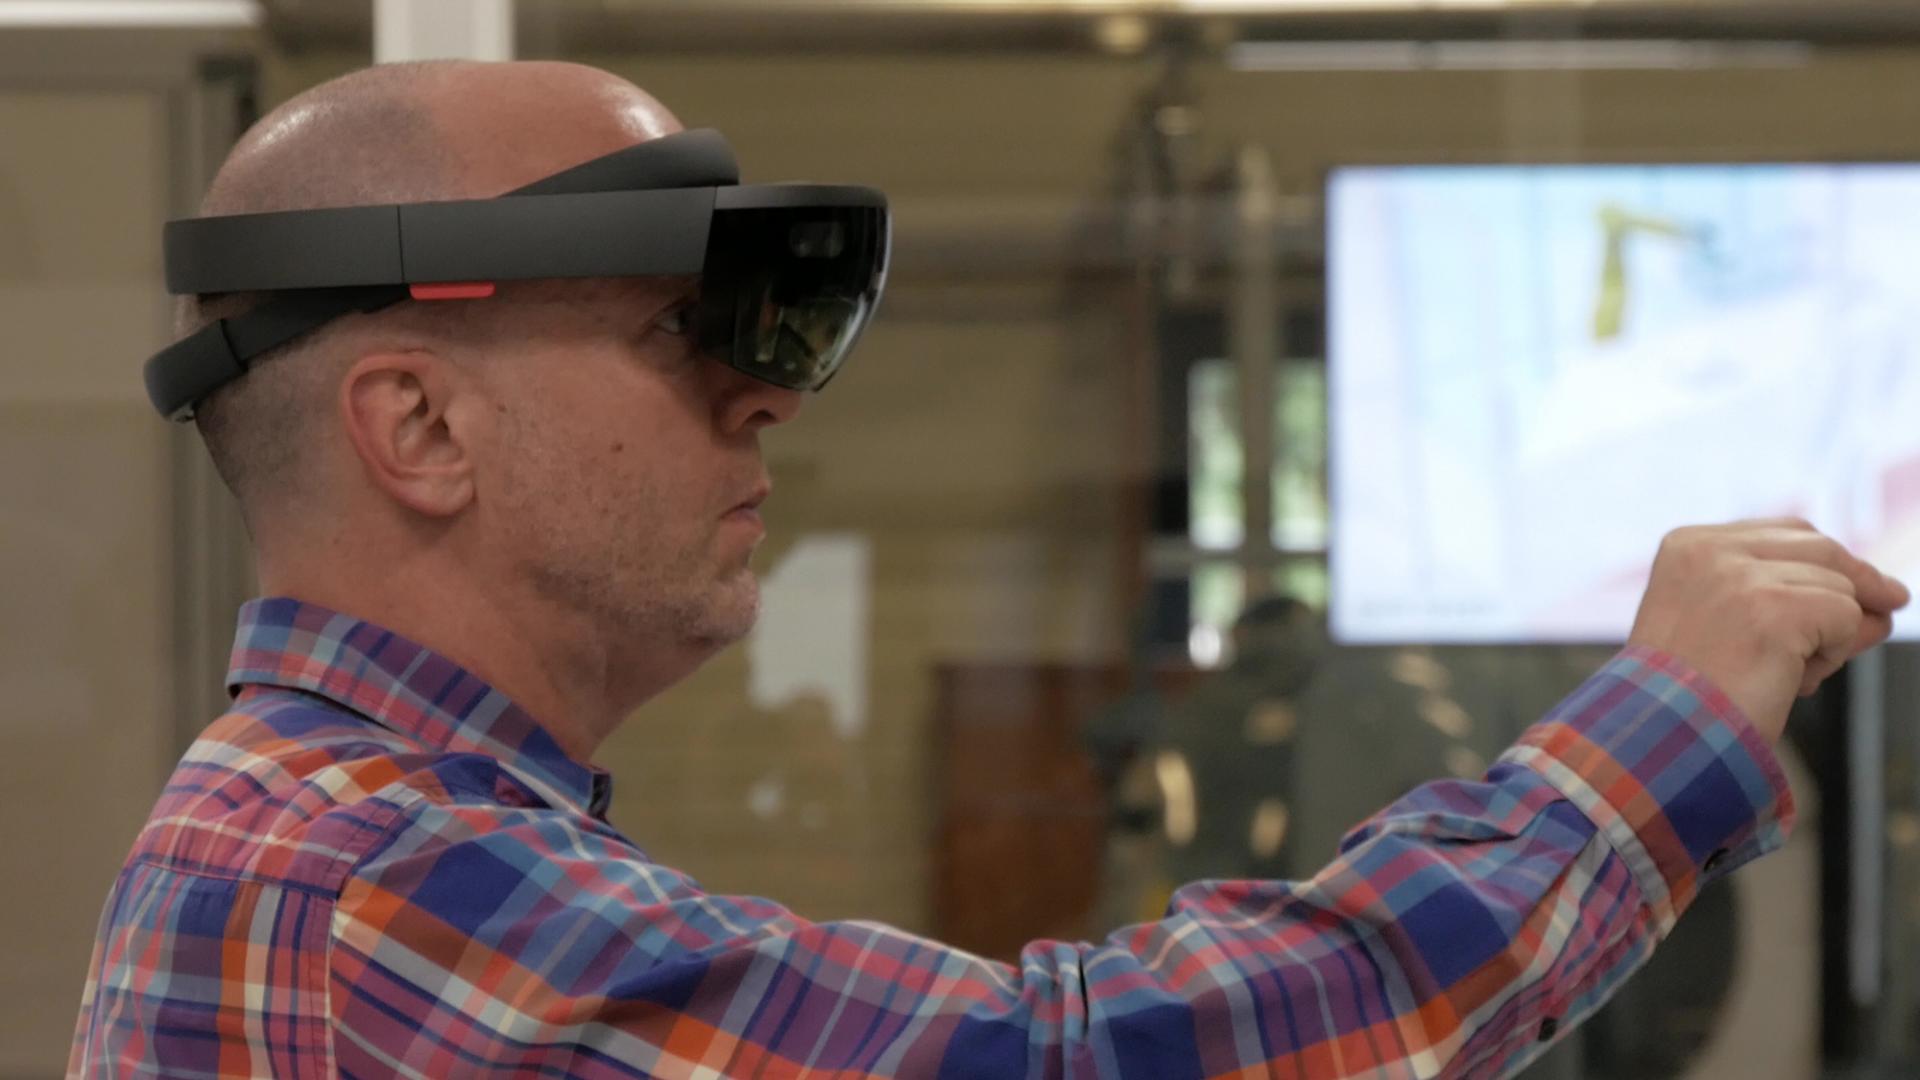 Nexonar - Hololens - Forschung - Augemented Reality - Industrie - Microsoft Hololens - realtime visions